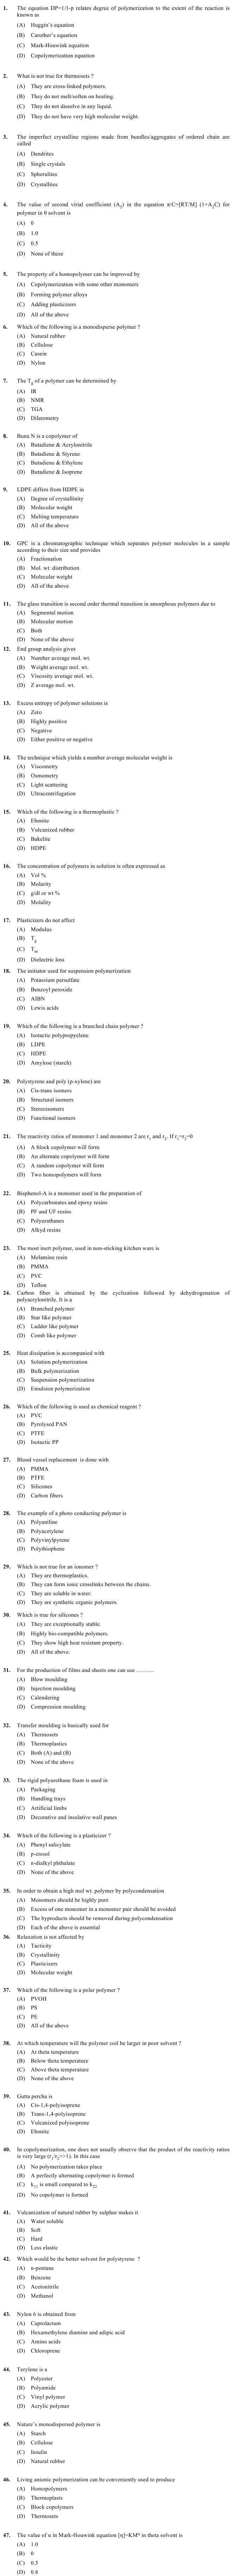 OJEE 2013 Question Paper for PGAT Plastic Eng.